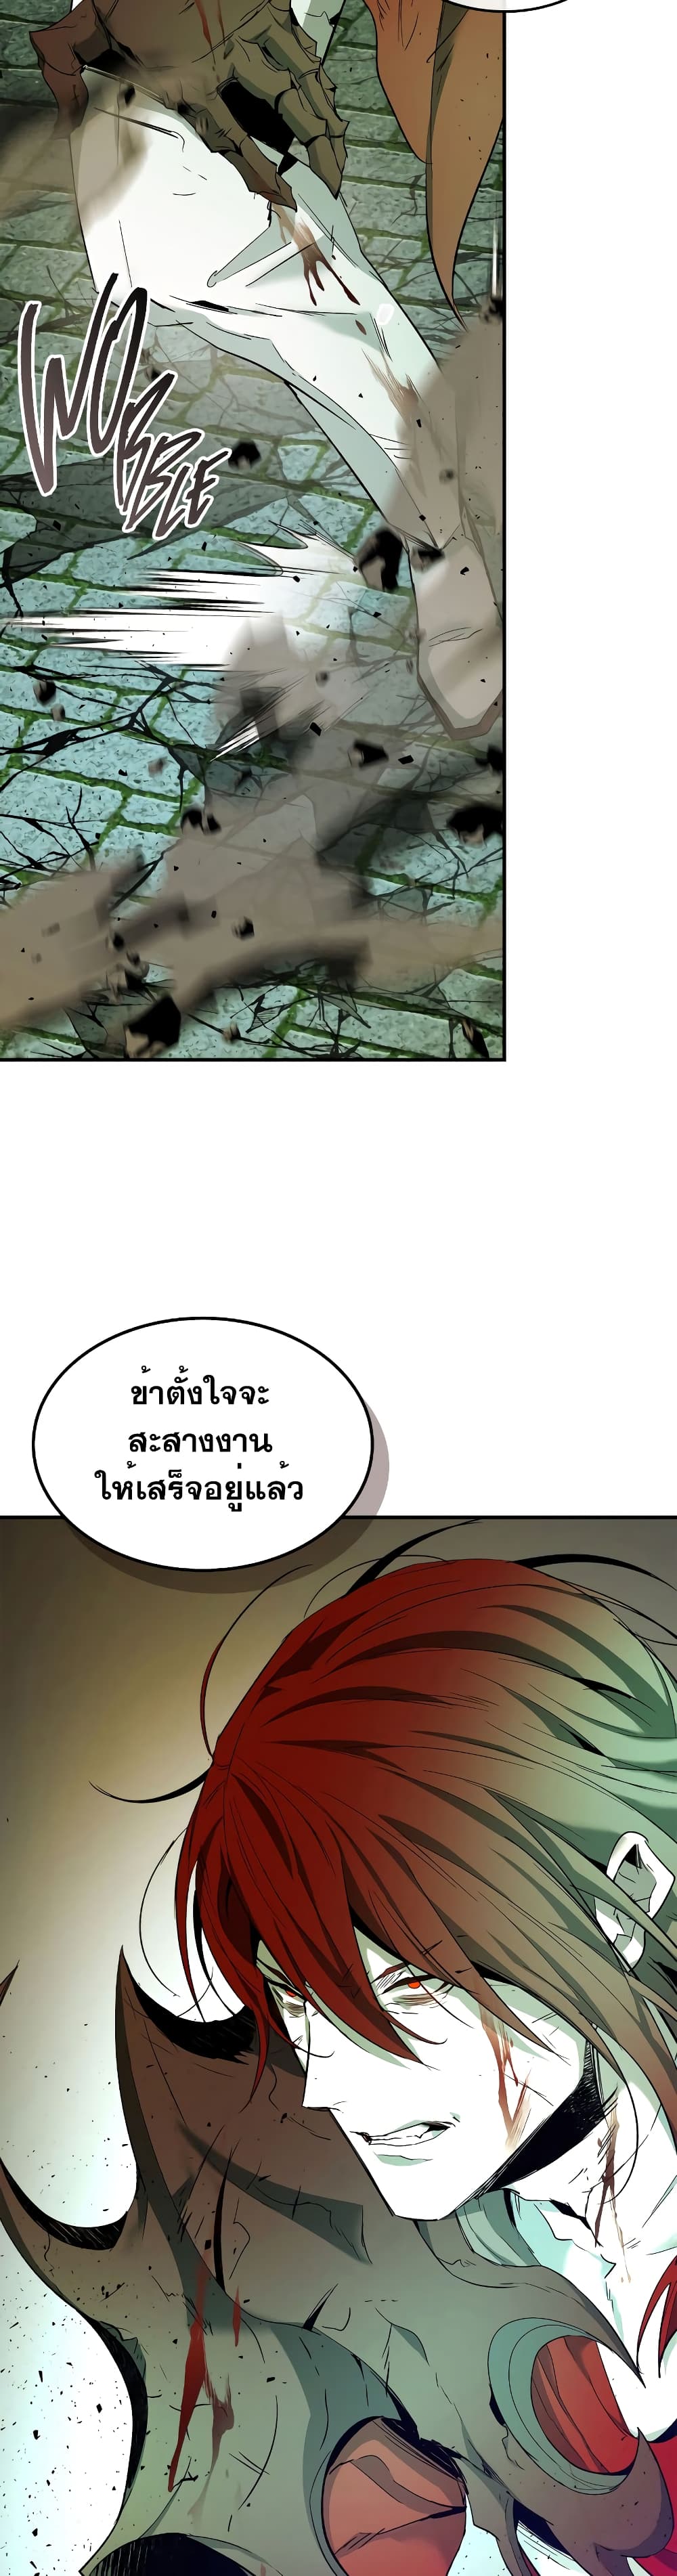 Leveling With The Gods 30 แปลไทย